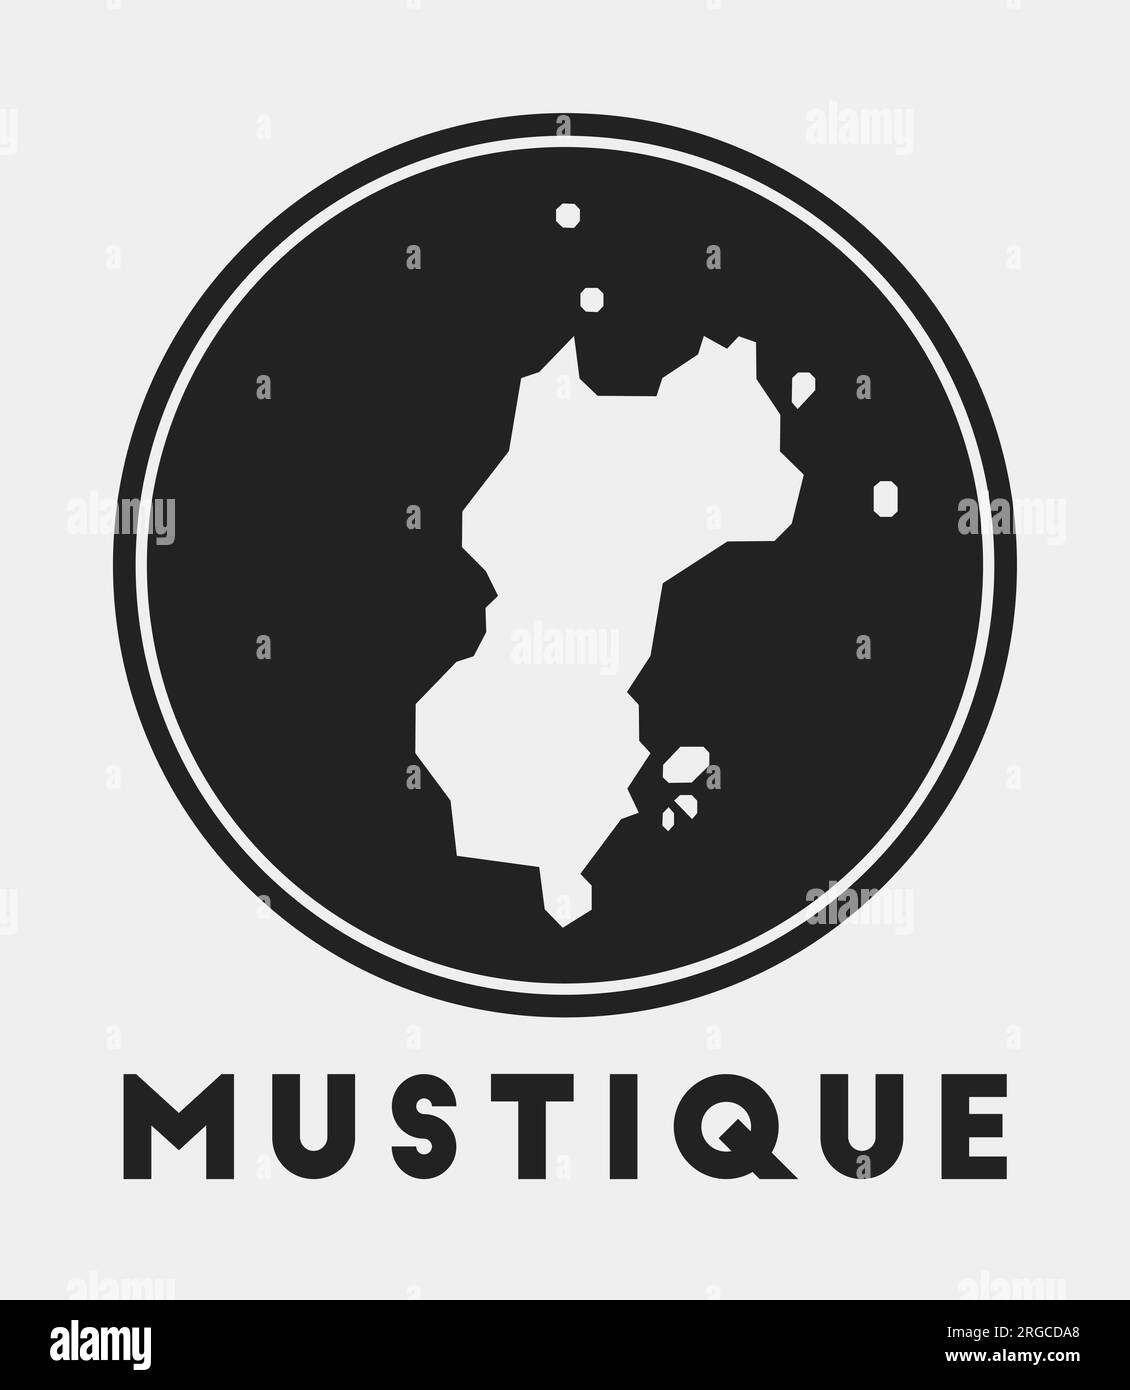 Mustique icon. Round logo with island map and title. Stylish Mustique badge with map. Vector illustration. Stock Vector